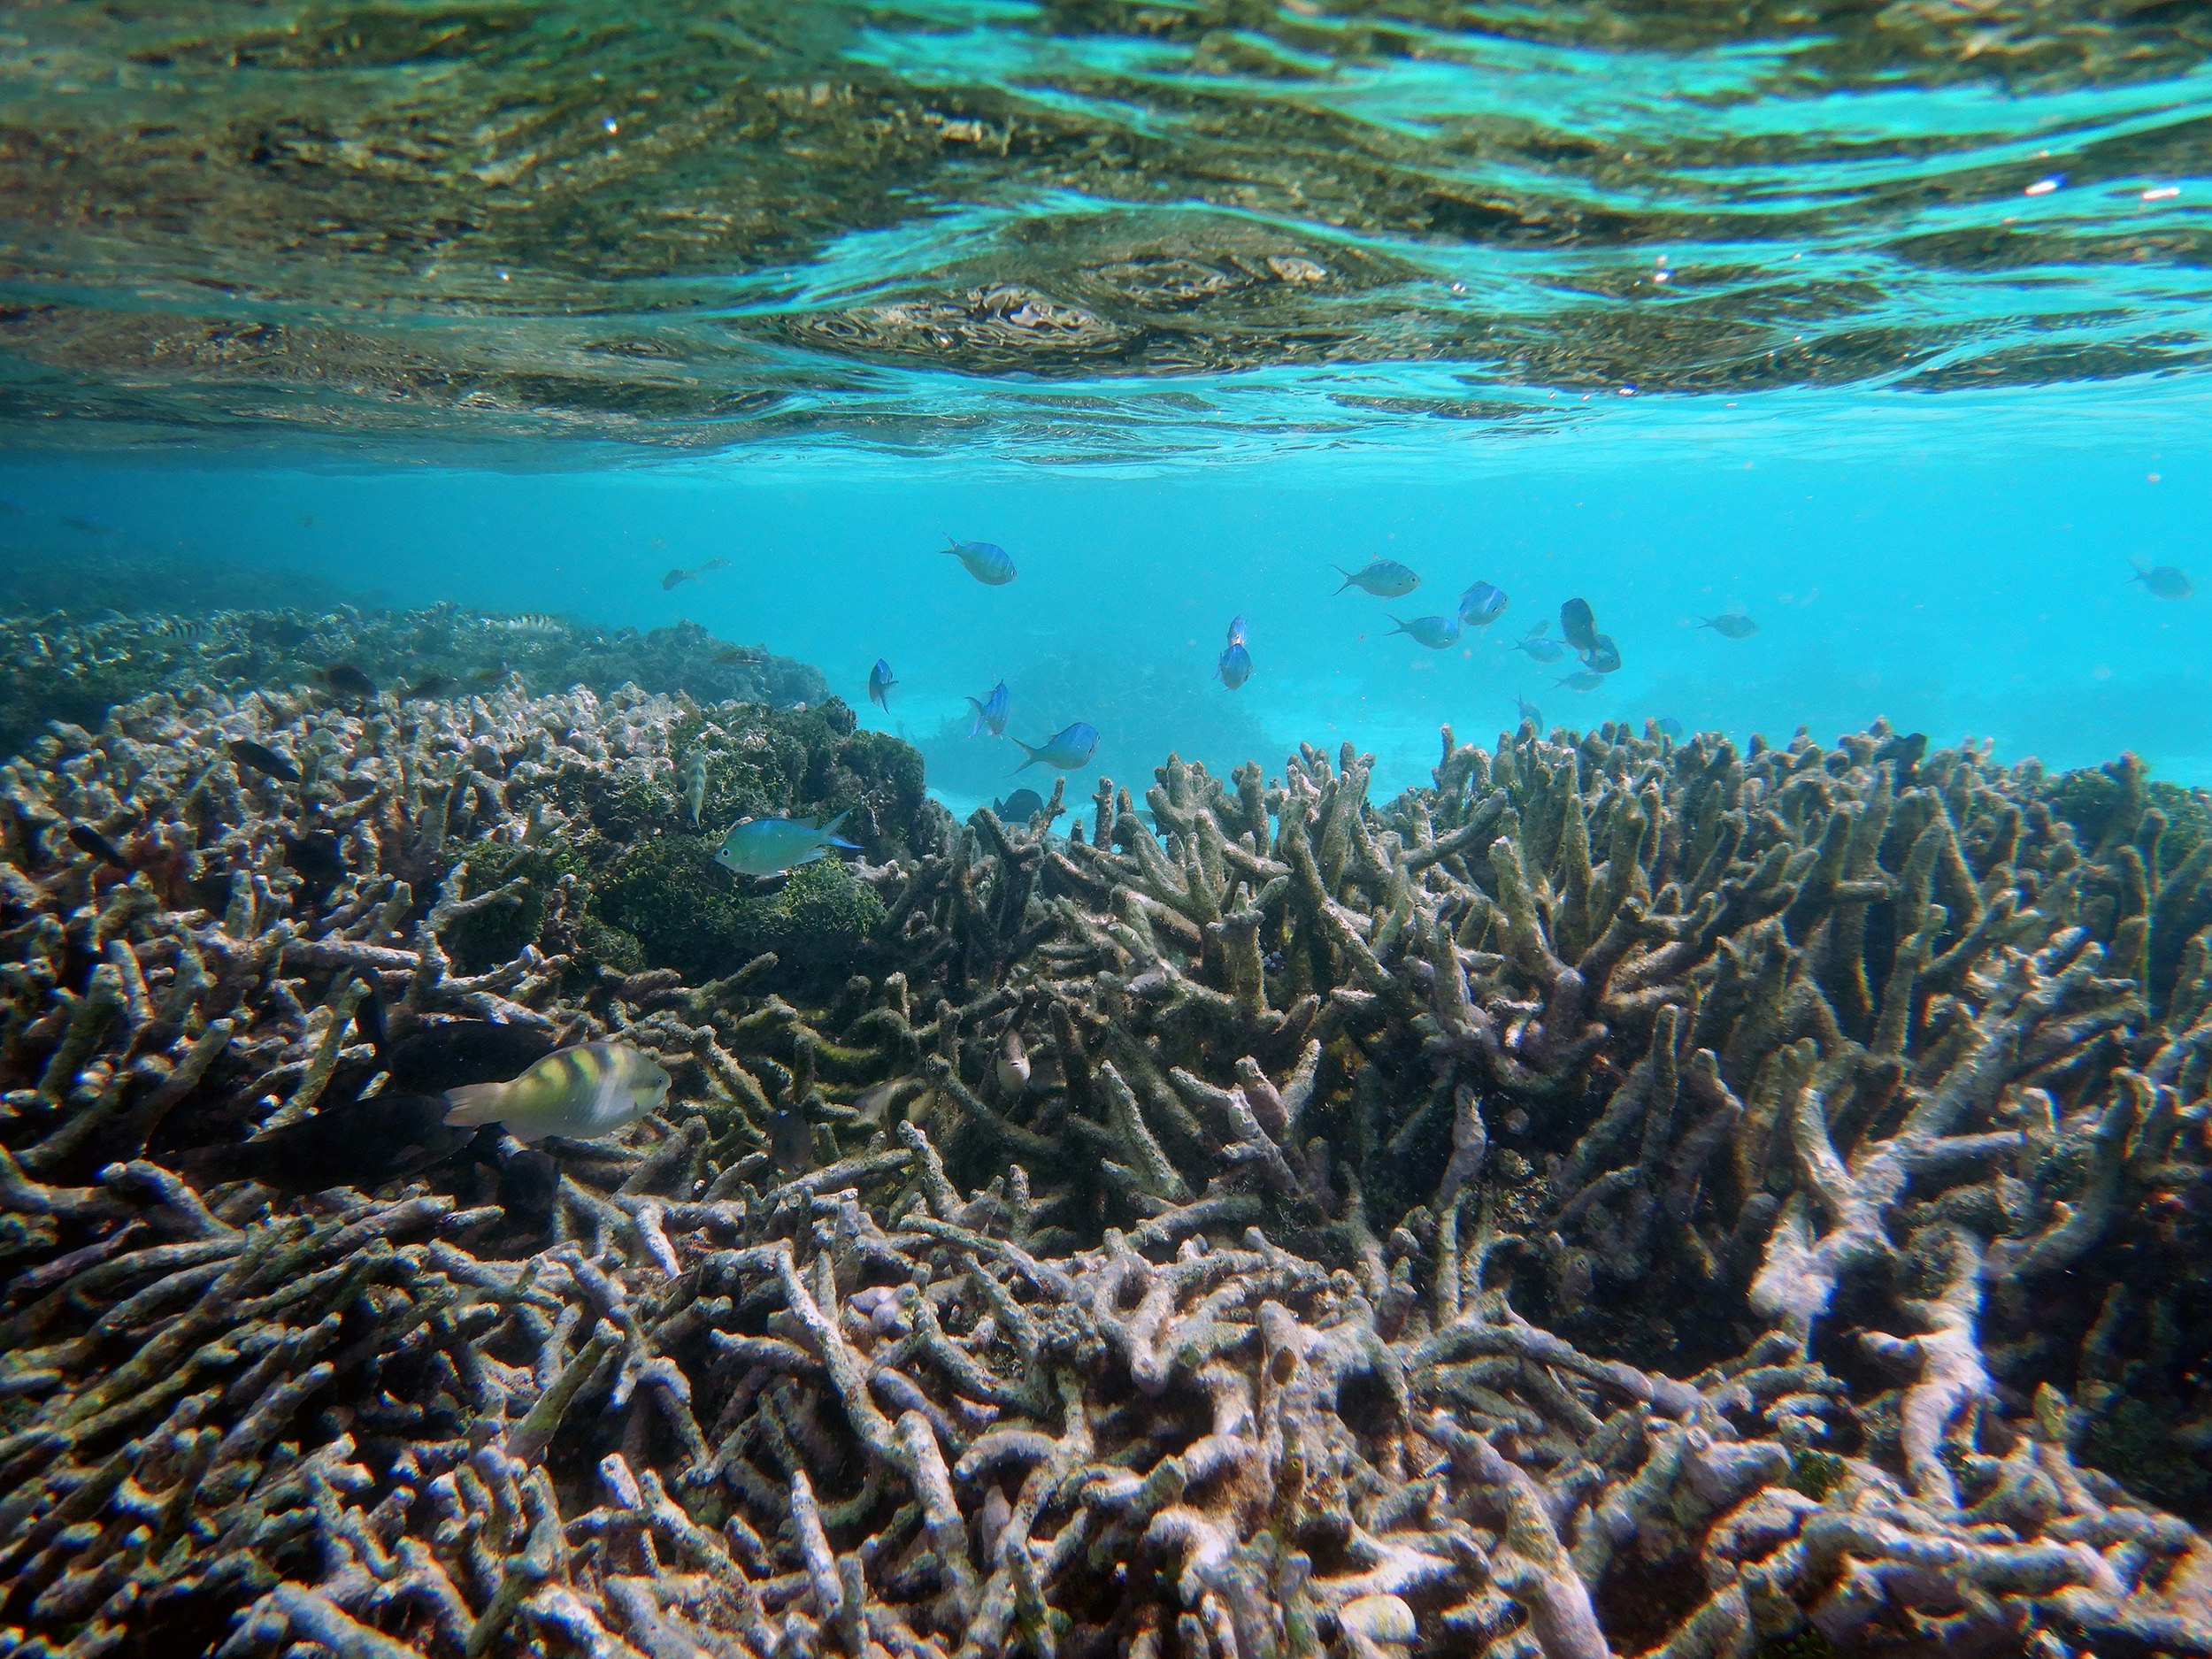 Green chromis fish swimming at low tide in Maldivian reef showing evidence of coral bleaching